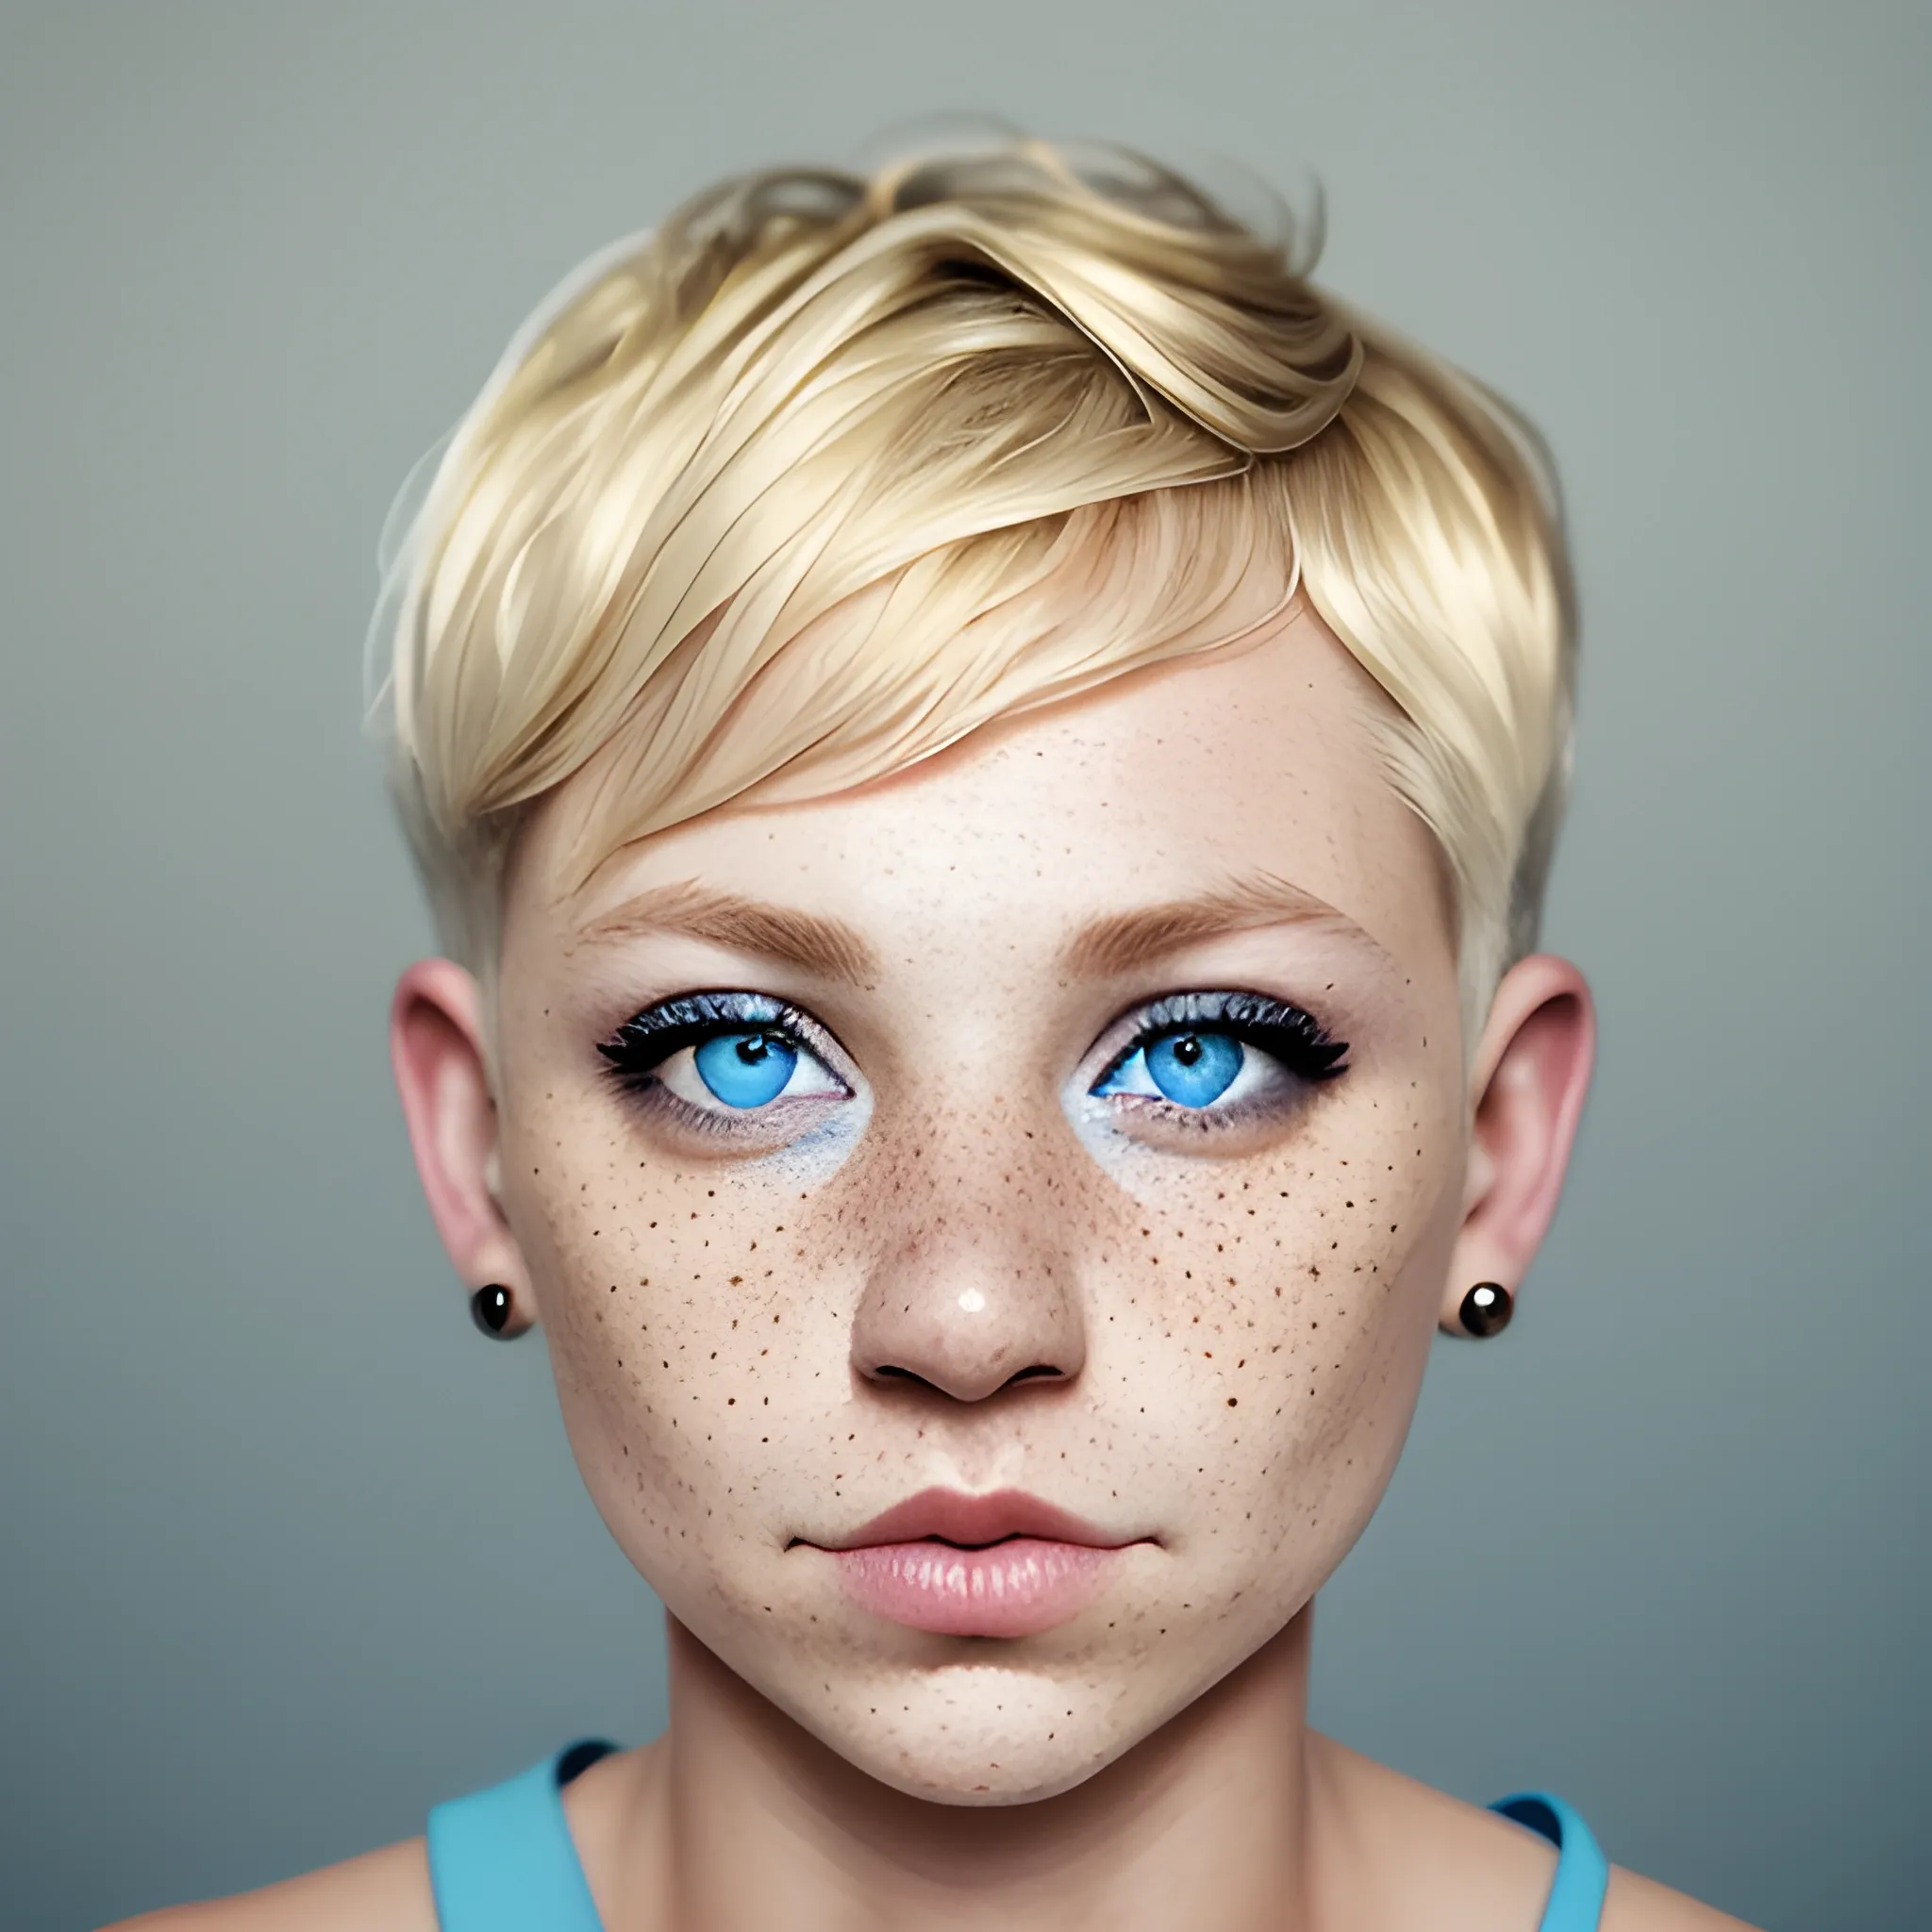 A woman with short blonde hair, septum ring, blue eyes portrait, round nose, freckles